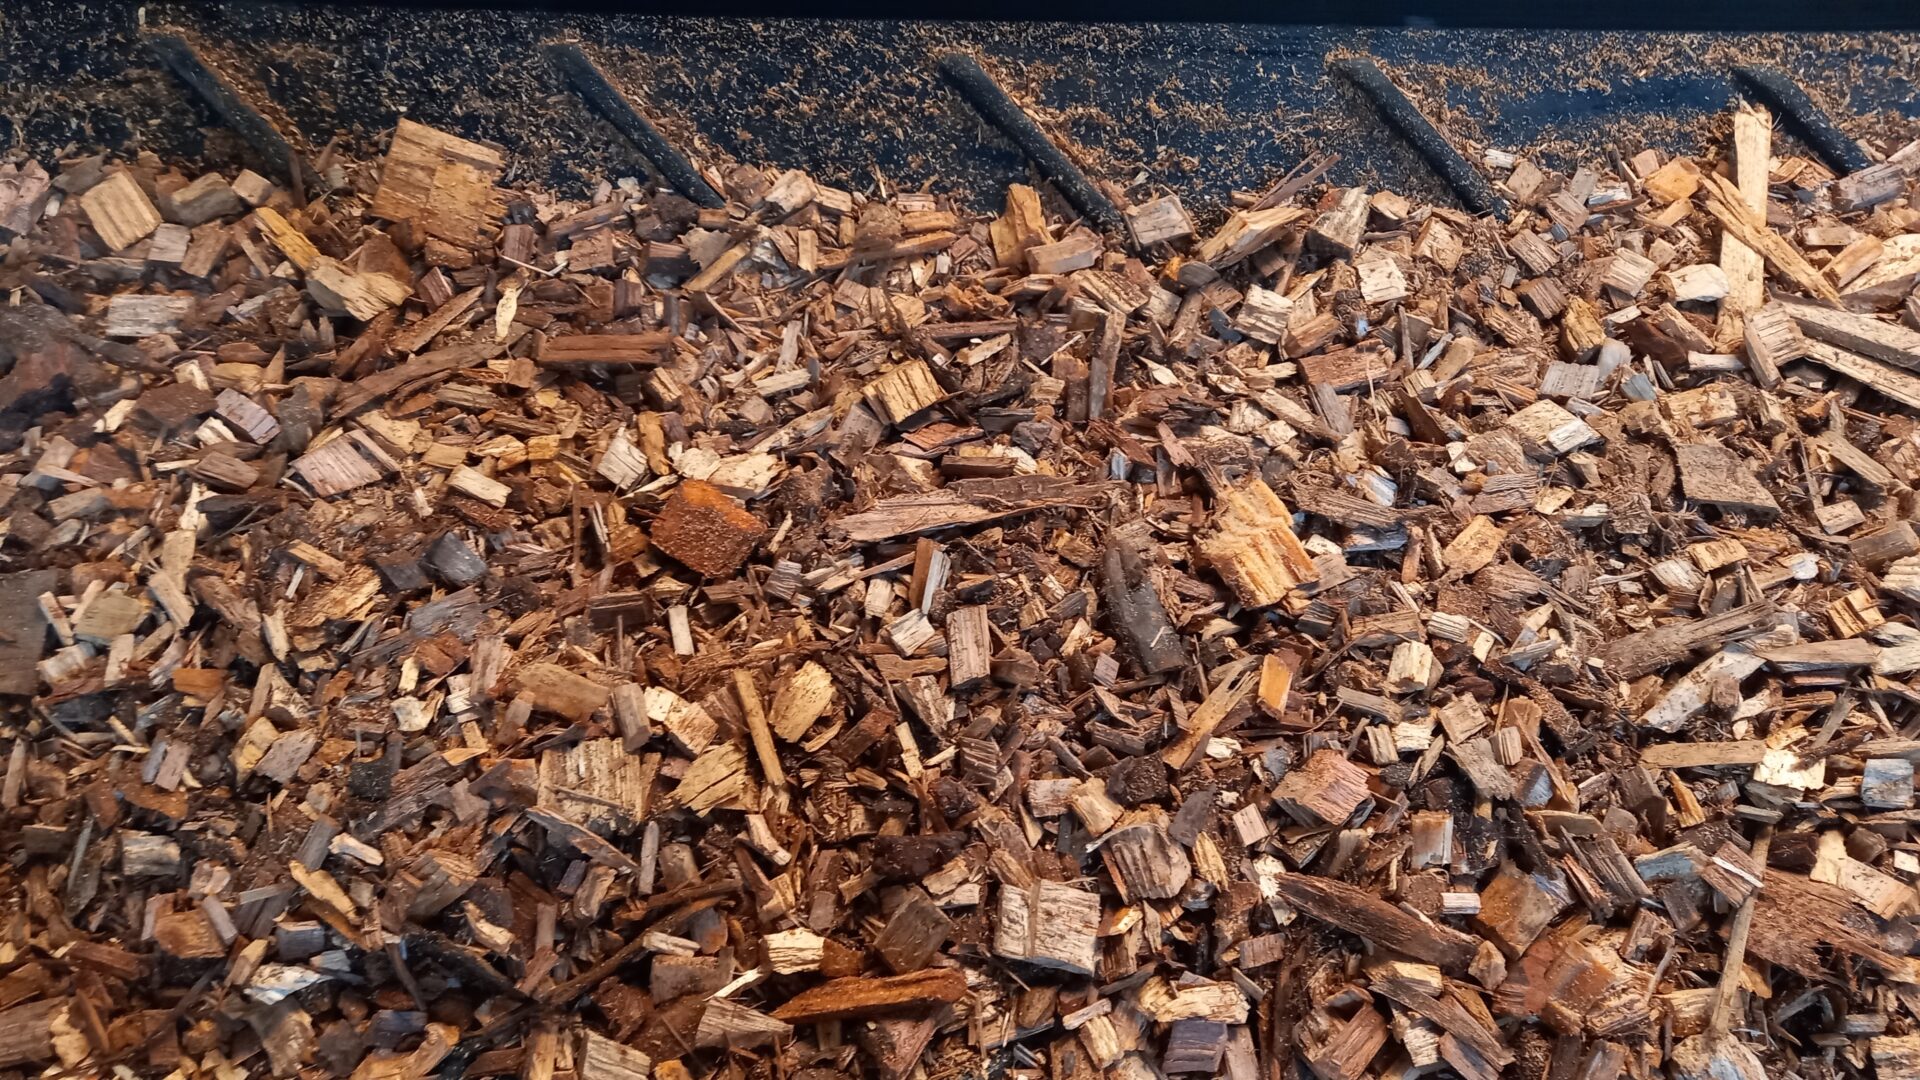 a multitude of wood chips, which are used in biomass power plants